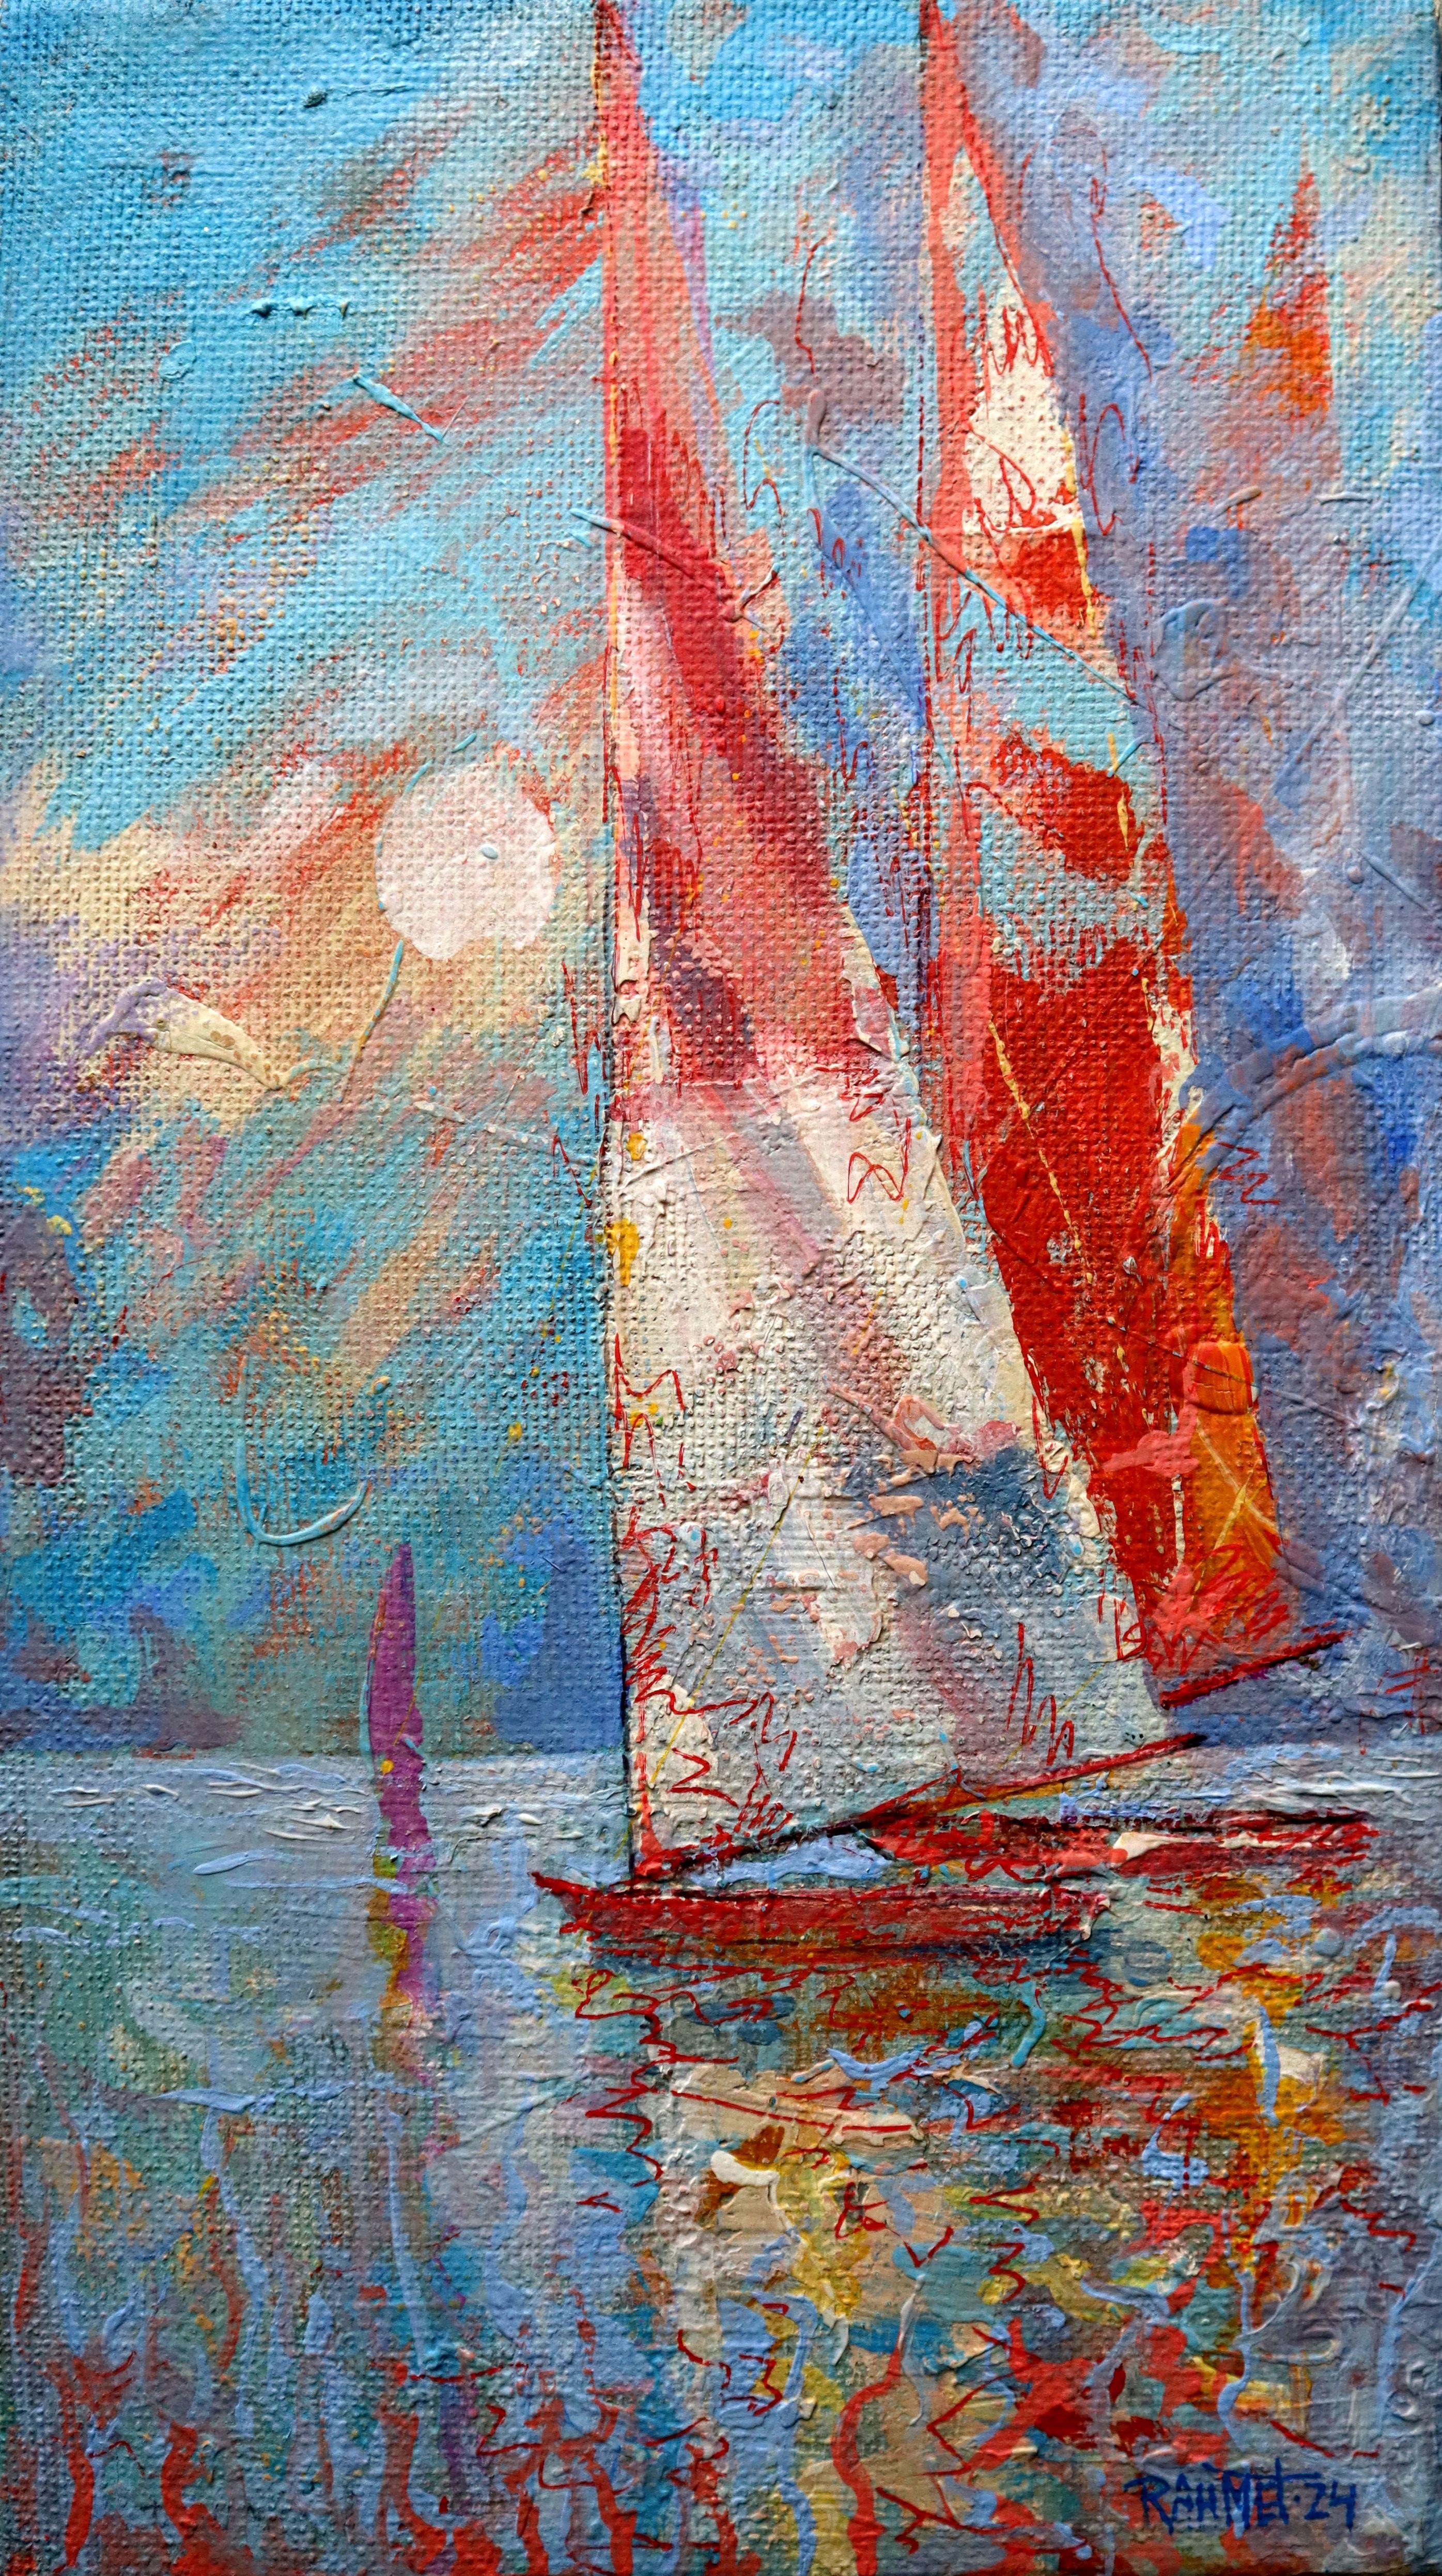 Two Sails